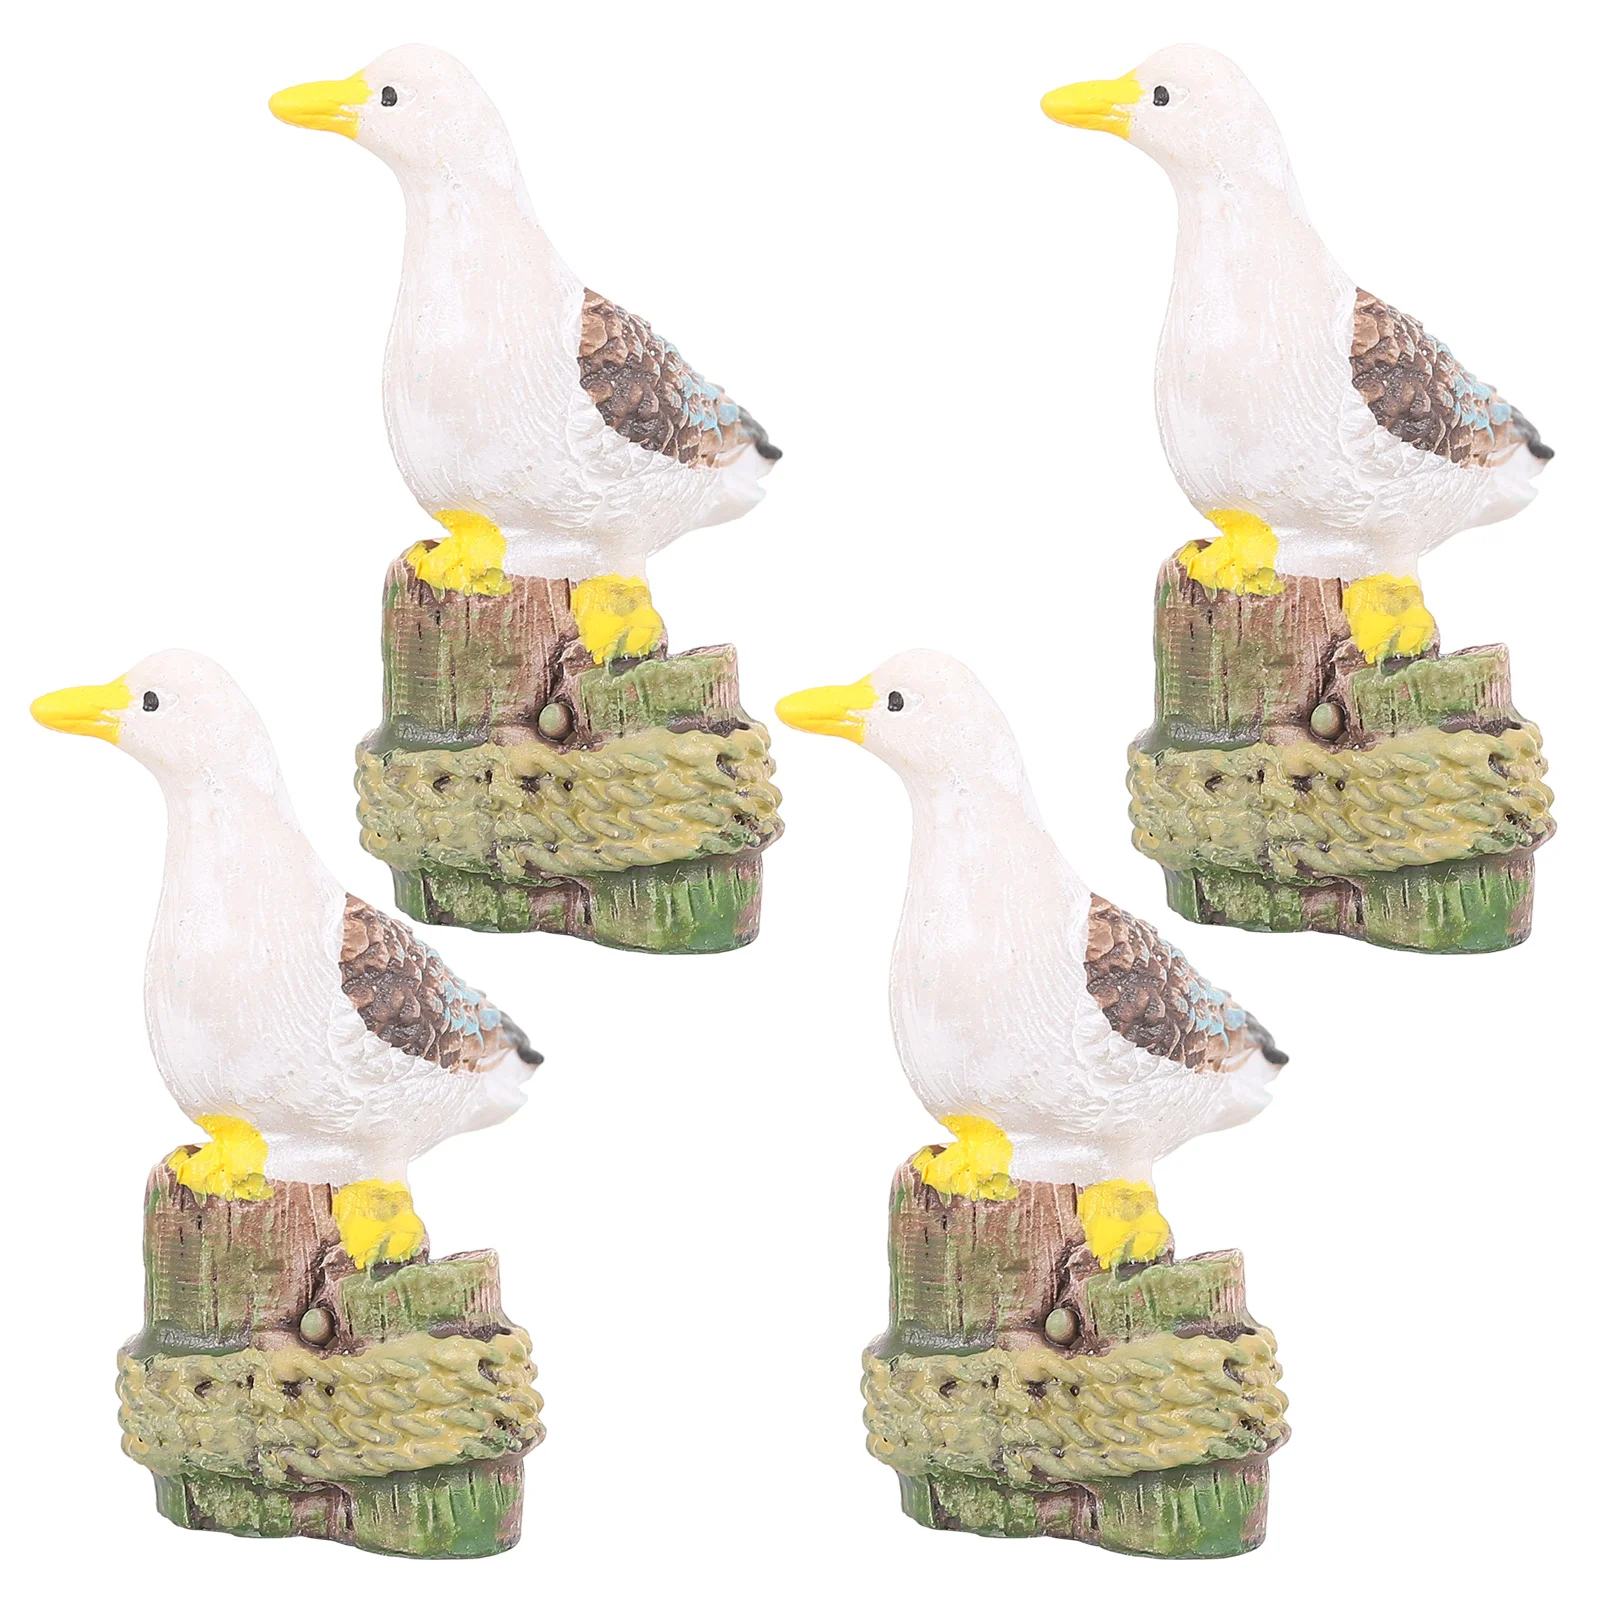 

4 Pcs Little Seagull Wooden Animal Toys Mini Ornaments Manual Dollhouse Birds DIY Craft Kids Gifts Resin Nature Model Child